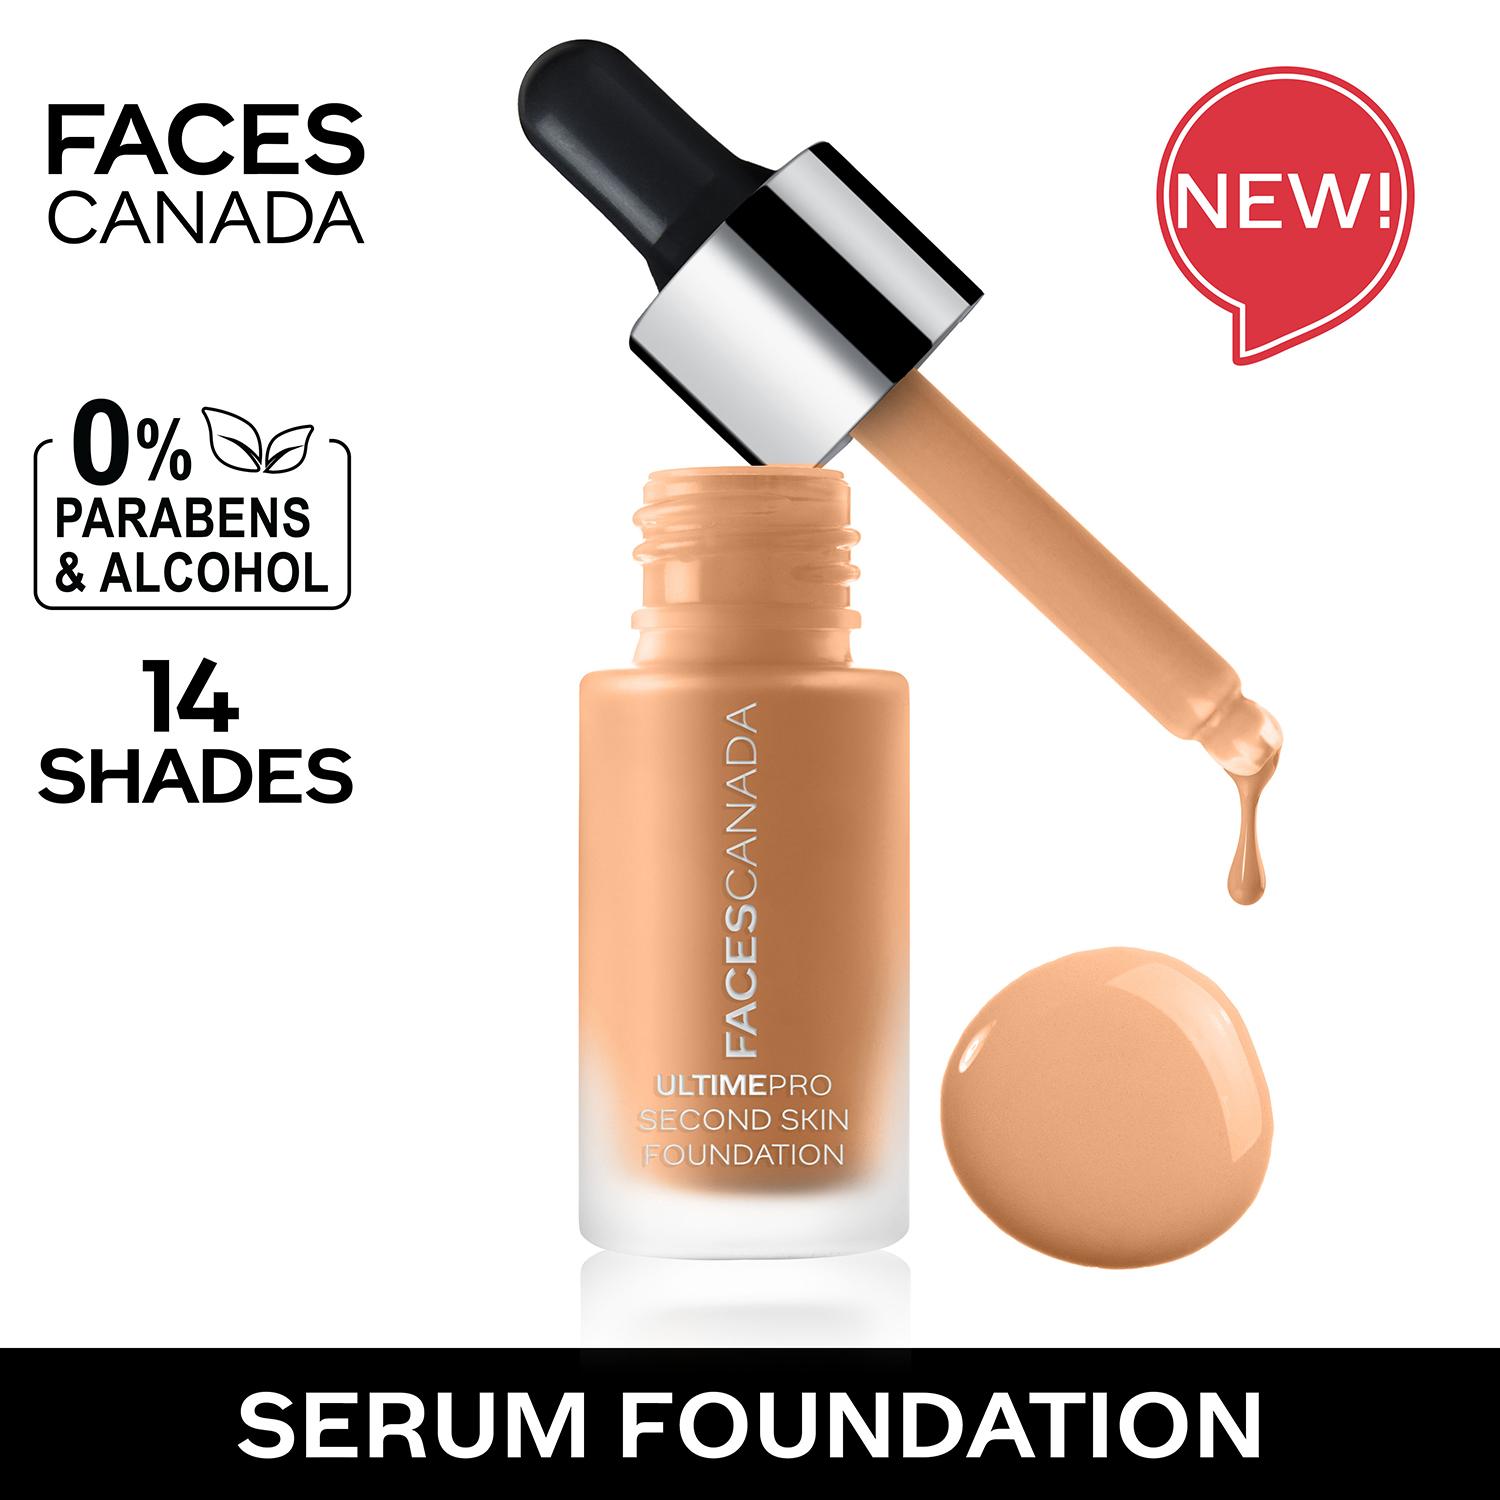 Faces Canada | Faces Canada Ultime Pro Second Skin Foundation - 12 Absolute Ivory (15ml)